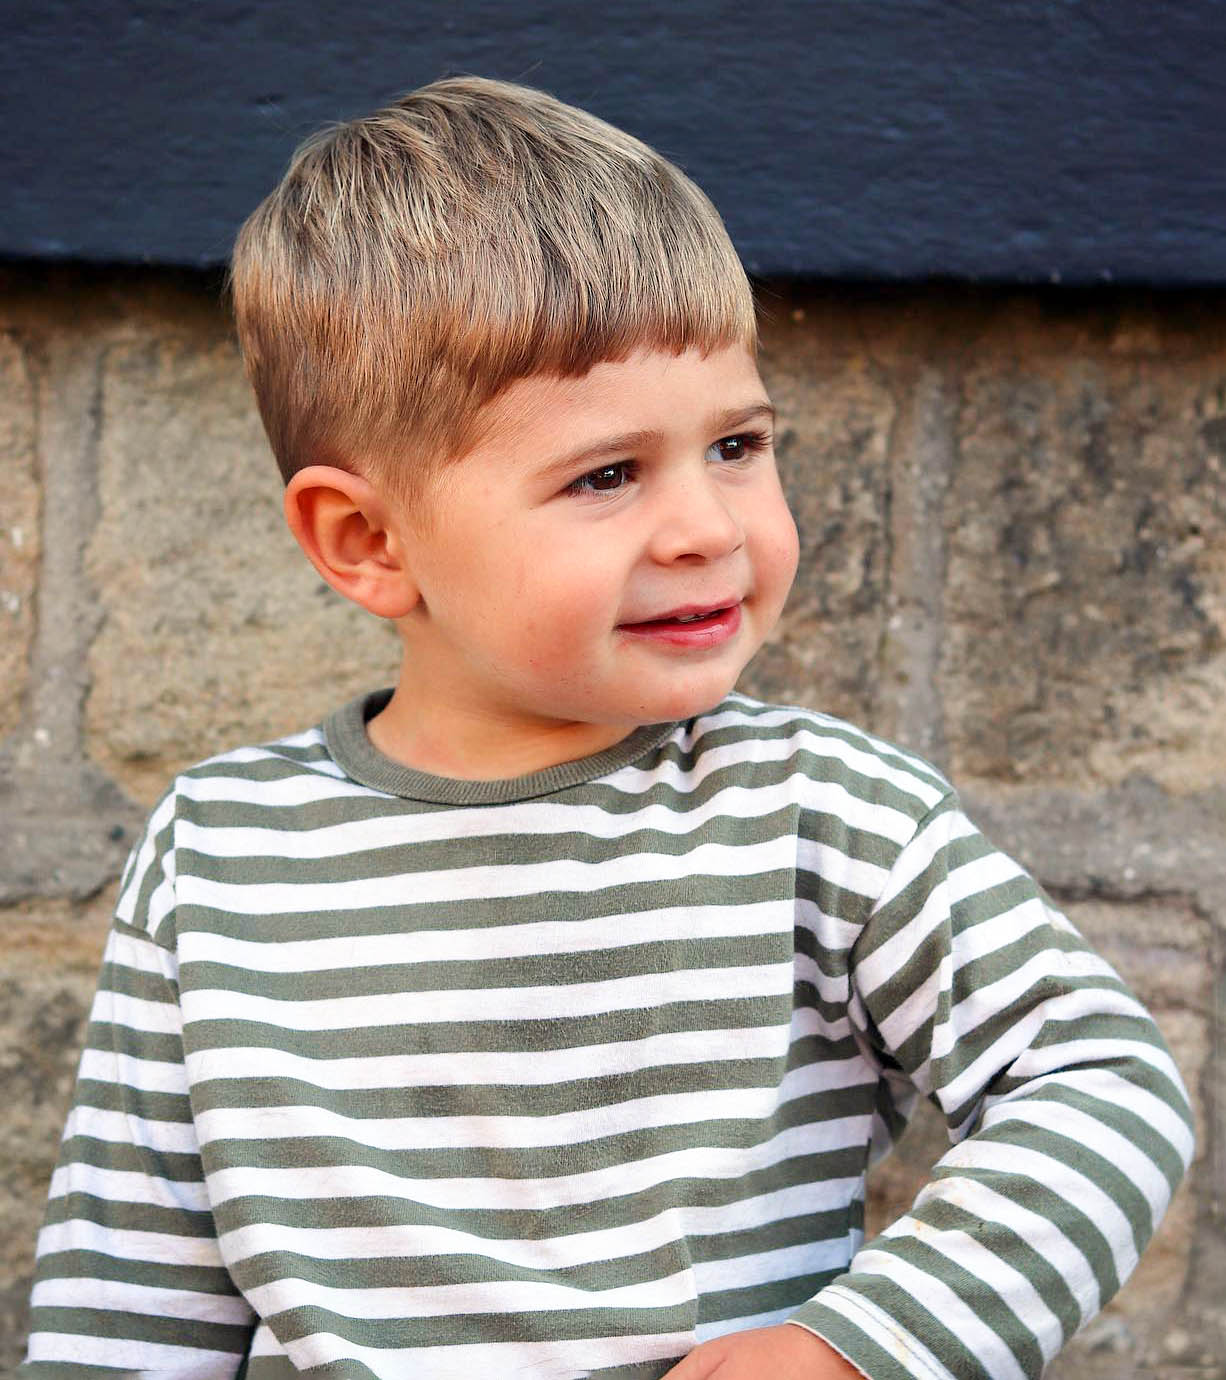 60 Cute Toddler Boy Haircuts Your Kids Will Love | Haircut Inspiration